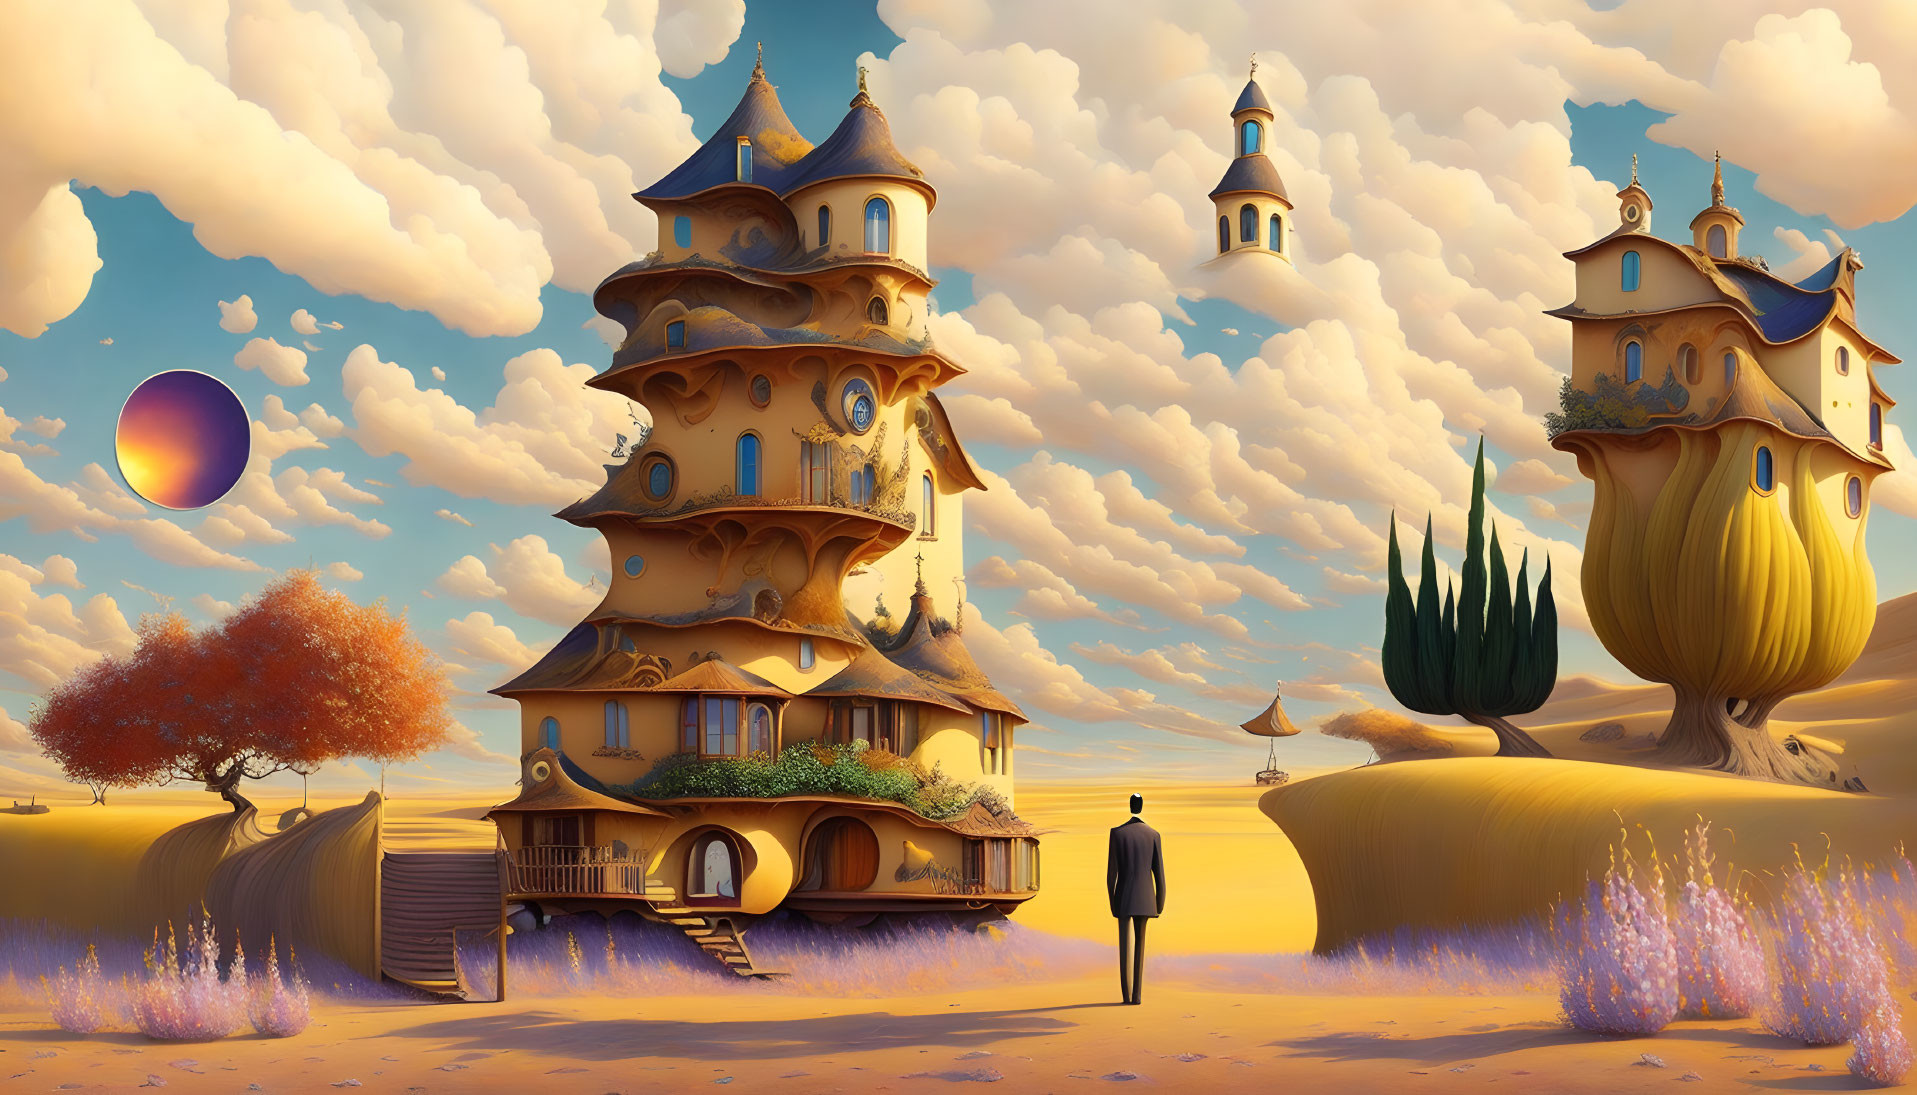 Whimsical surreal landscape with vibrant sky and unique elements